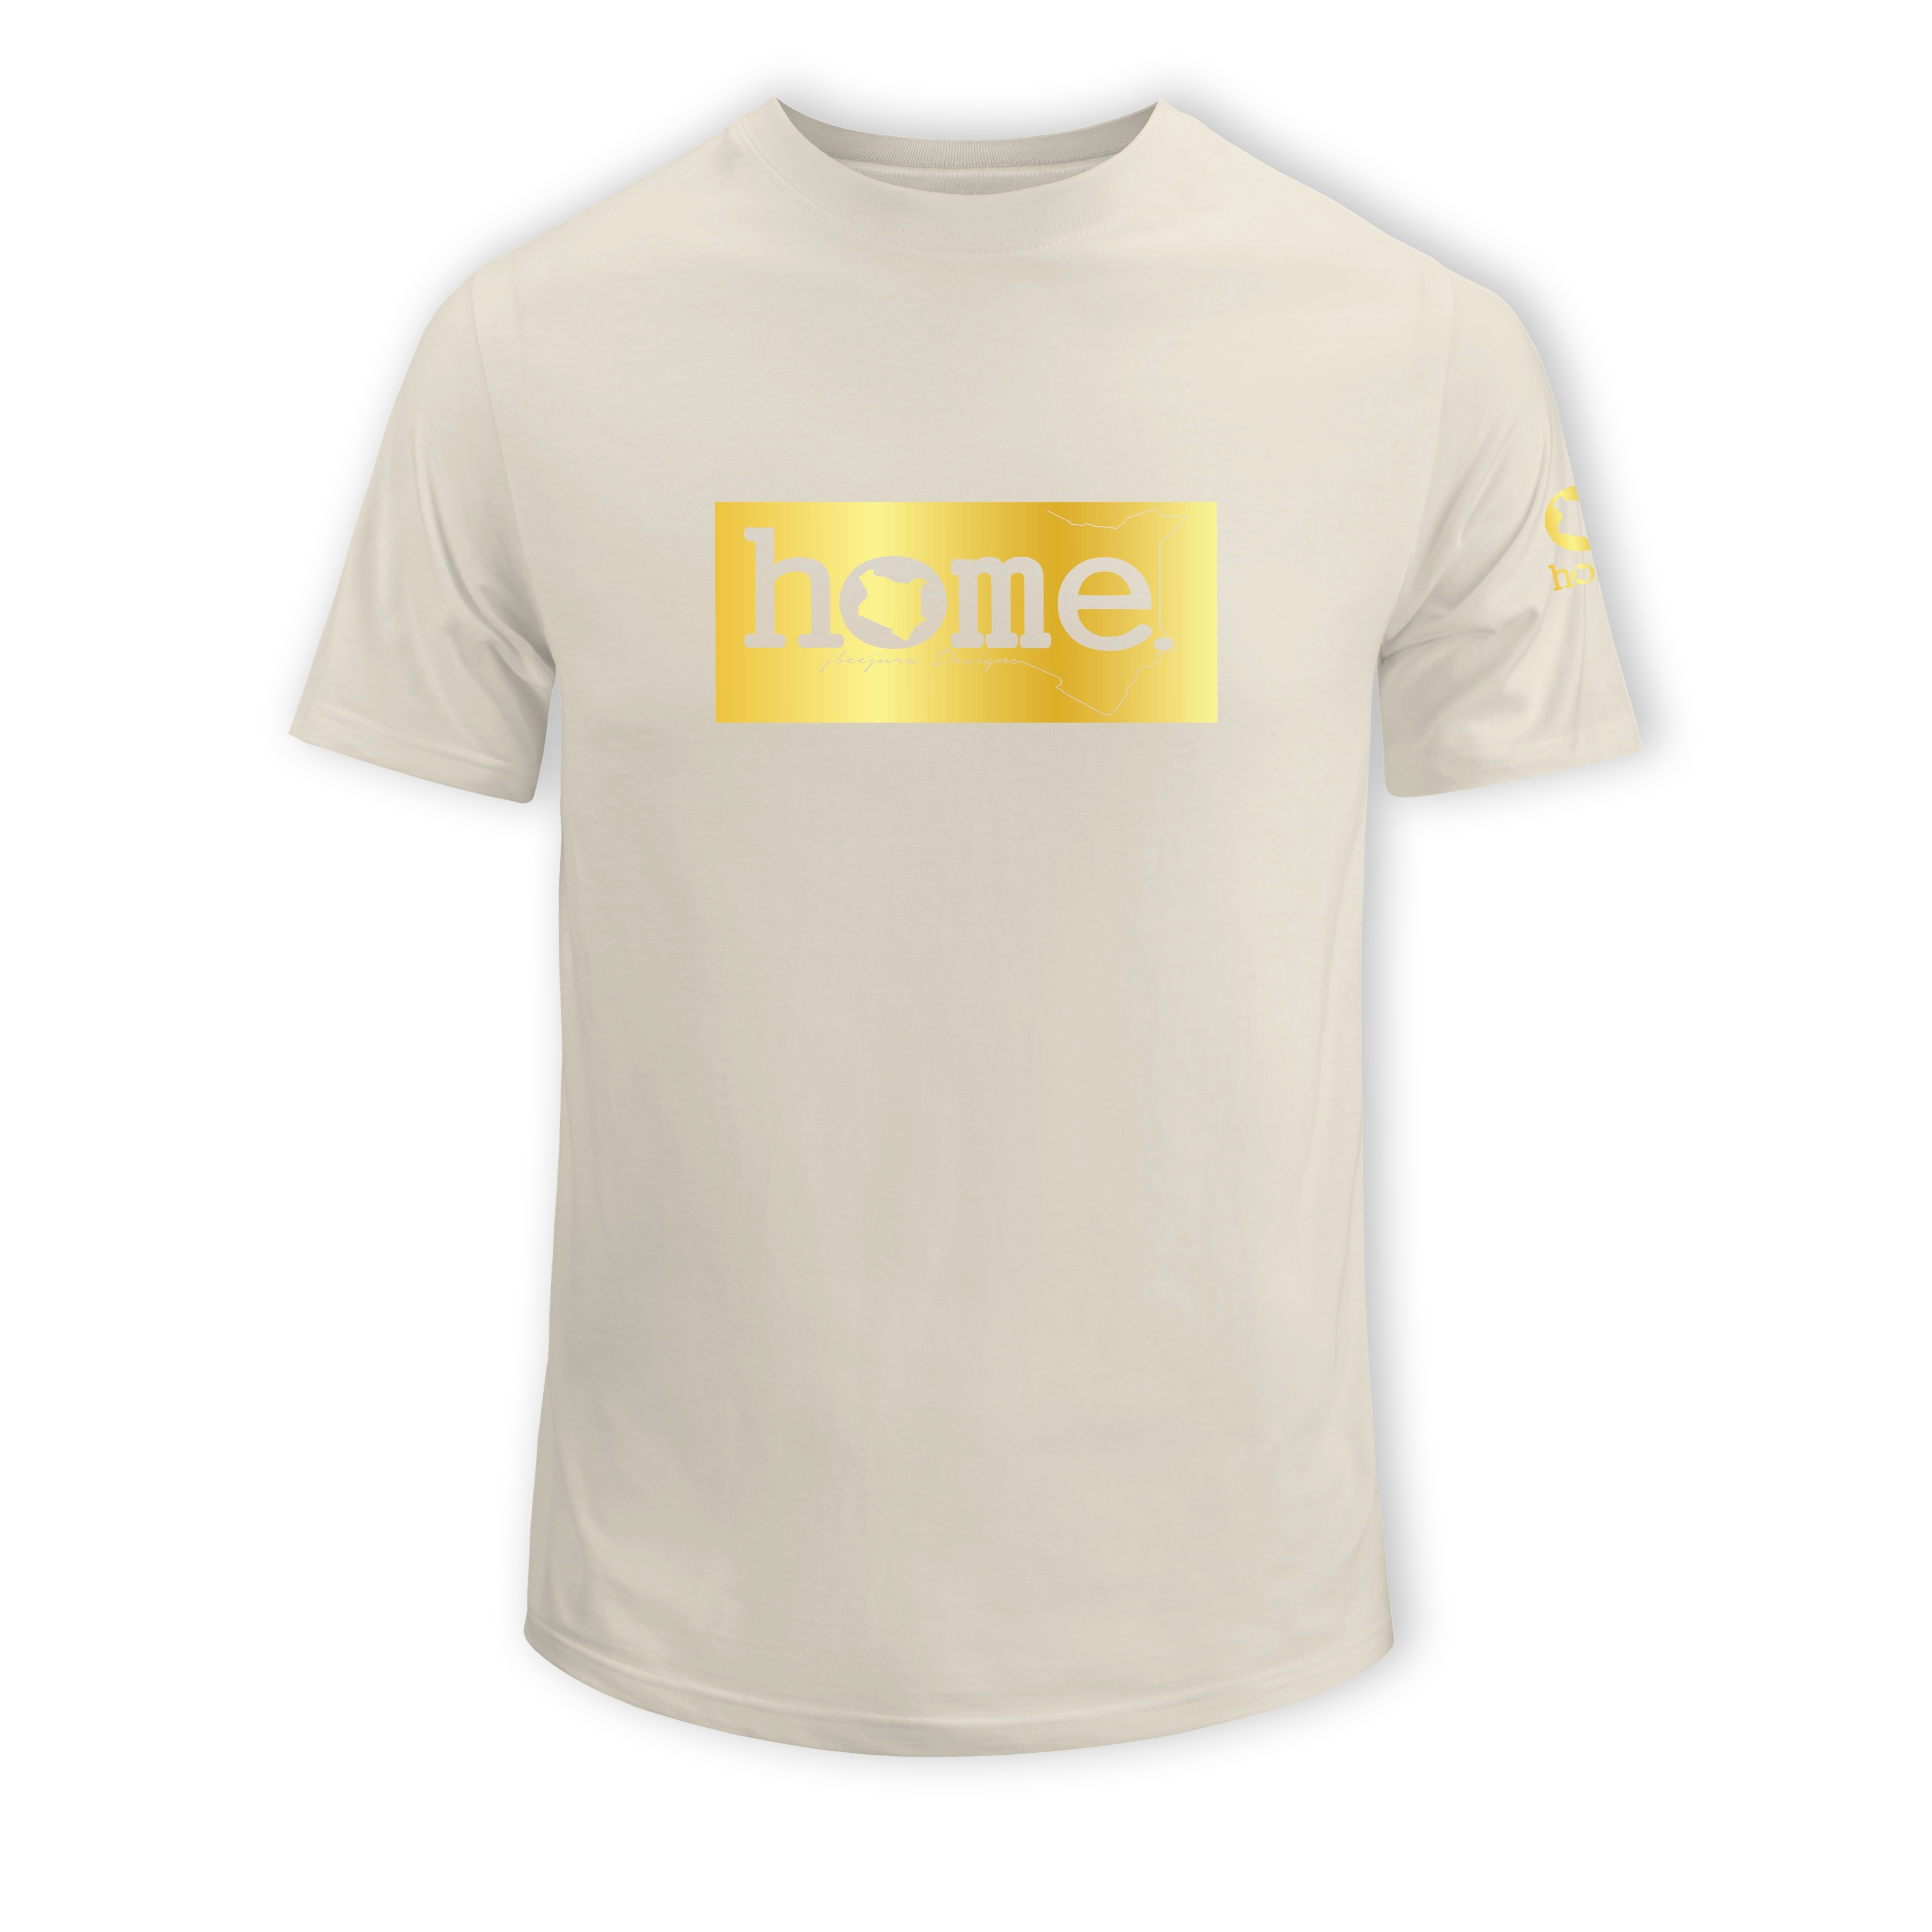 home_254 KIDS SHORT-SLEEVED NUDE T-SHIRT WITH A GOLD CLASSIC PRINT – COTTON PLUS FABRIC